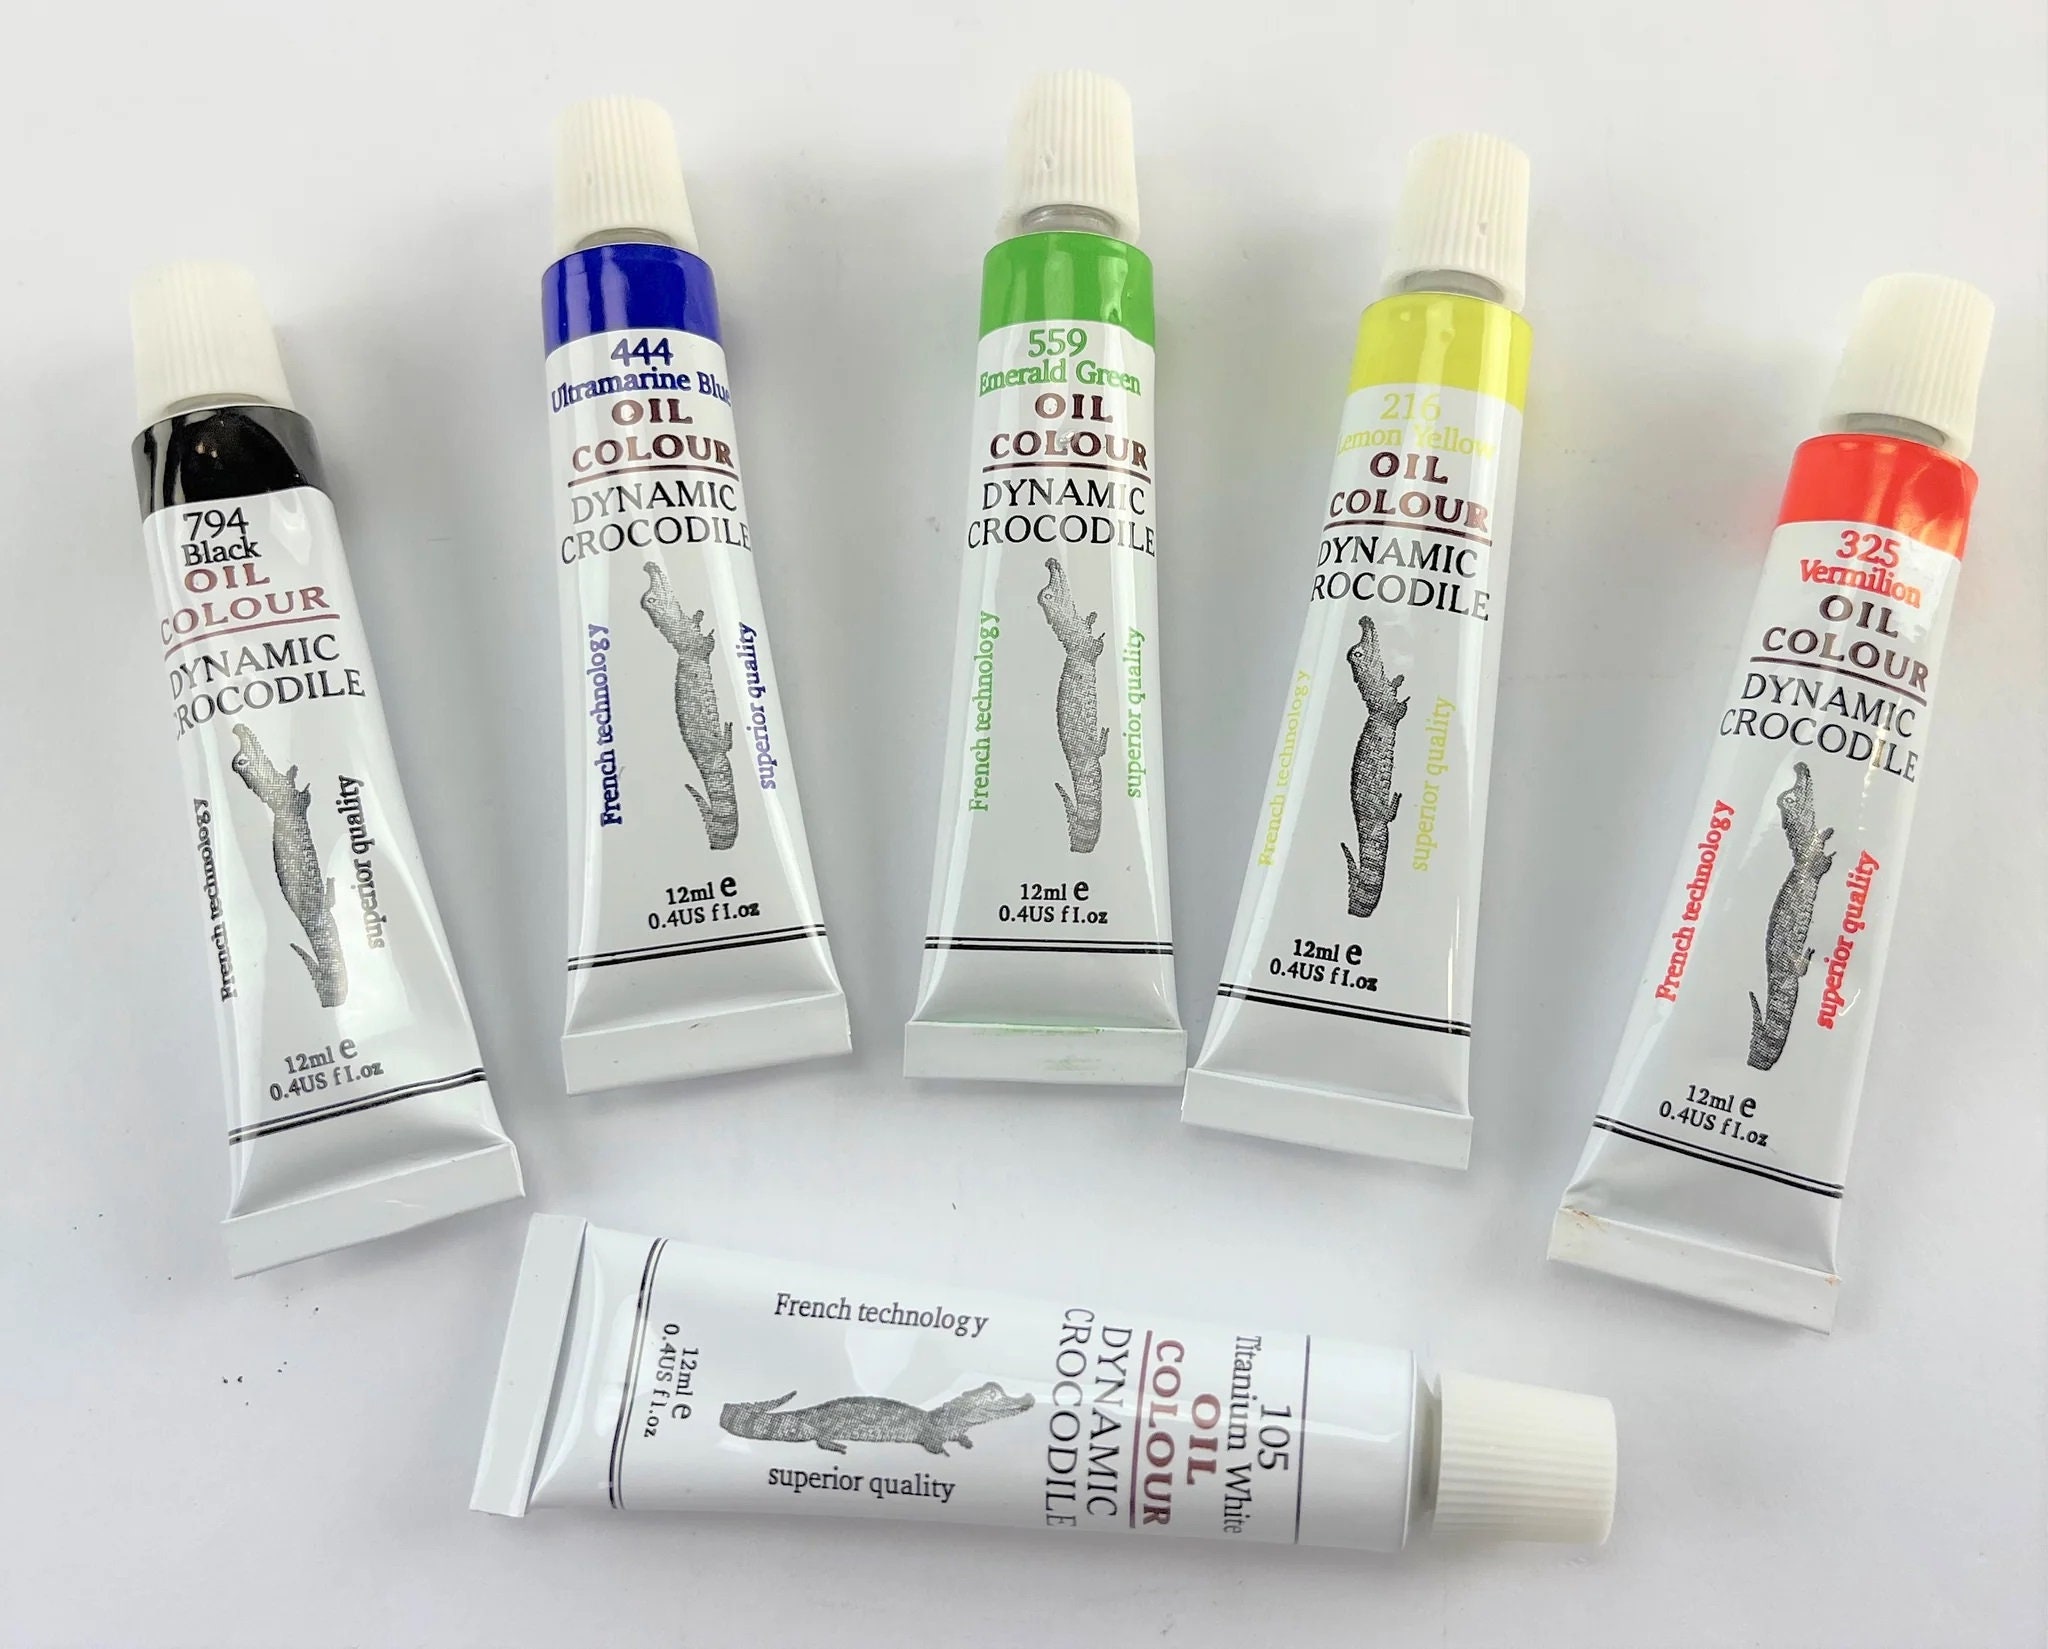 NEW Best Price Oil Paint Set, 24 Oil-based Colors, Artists Paints Oil  Painting Set, 12ml X 24 Tubes Fast Shipping 